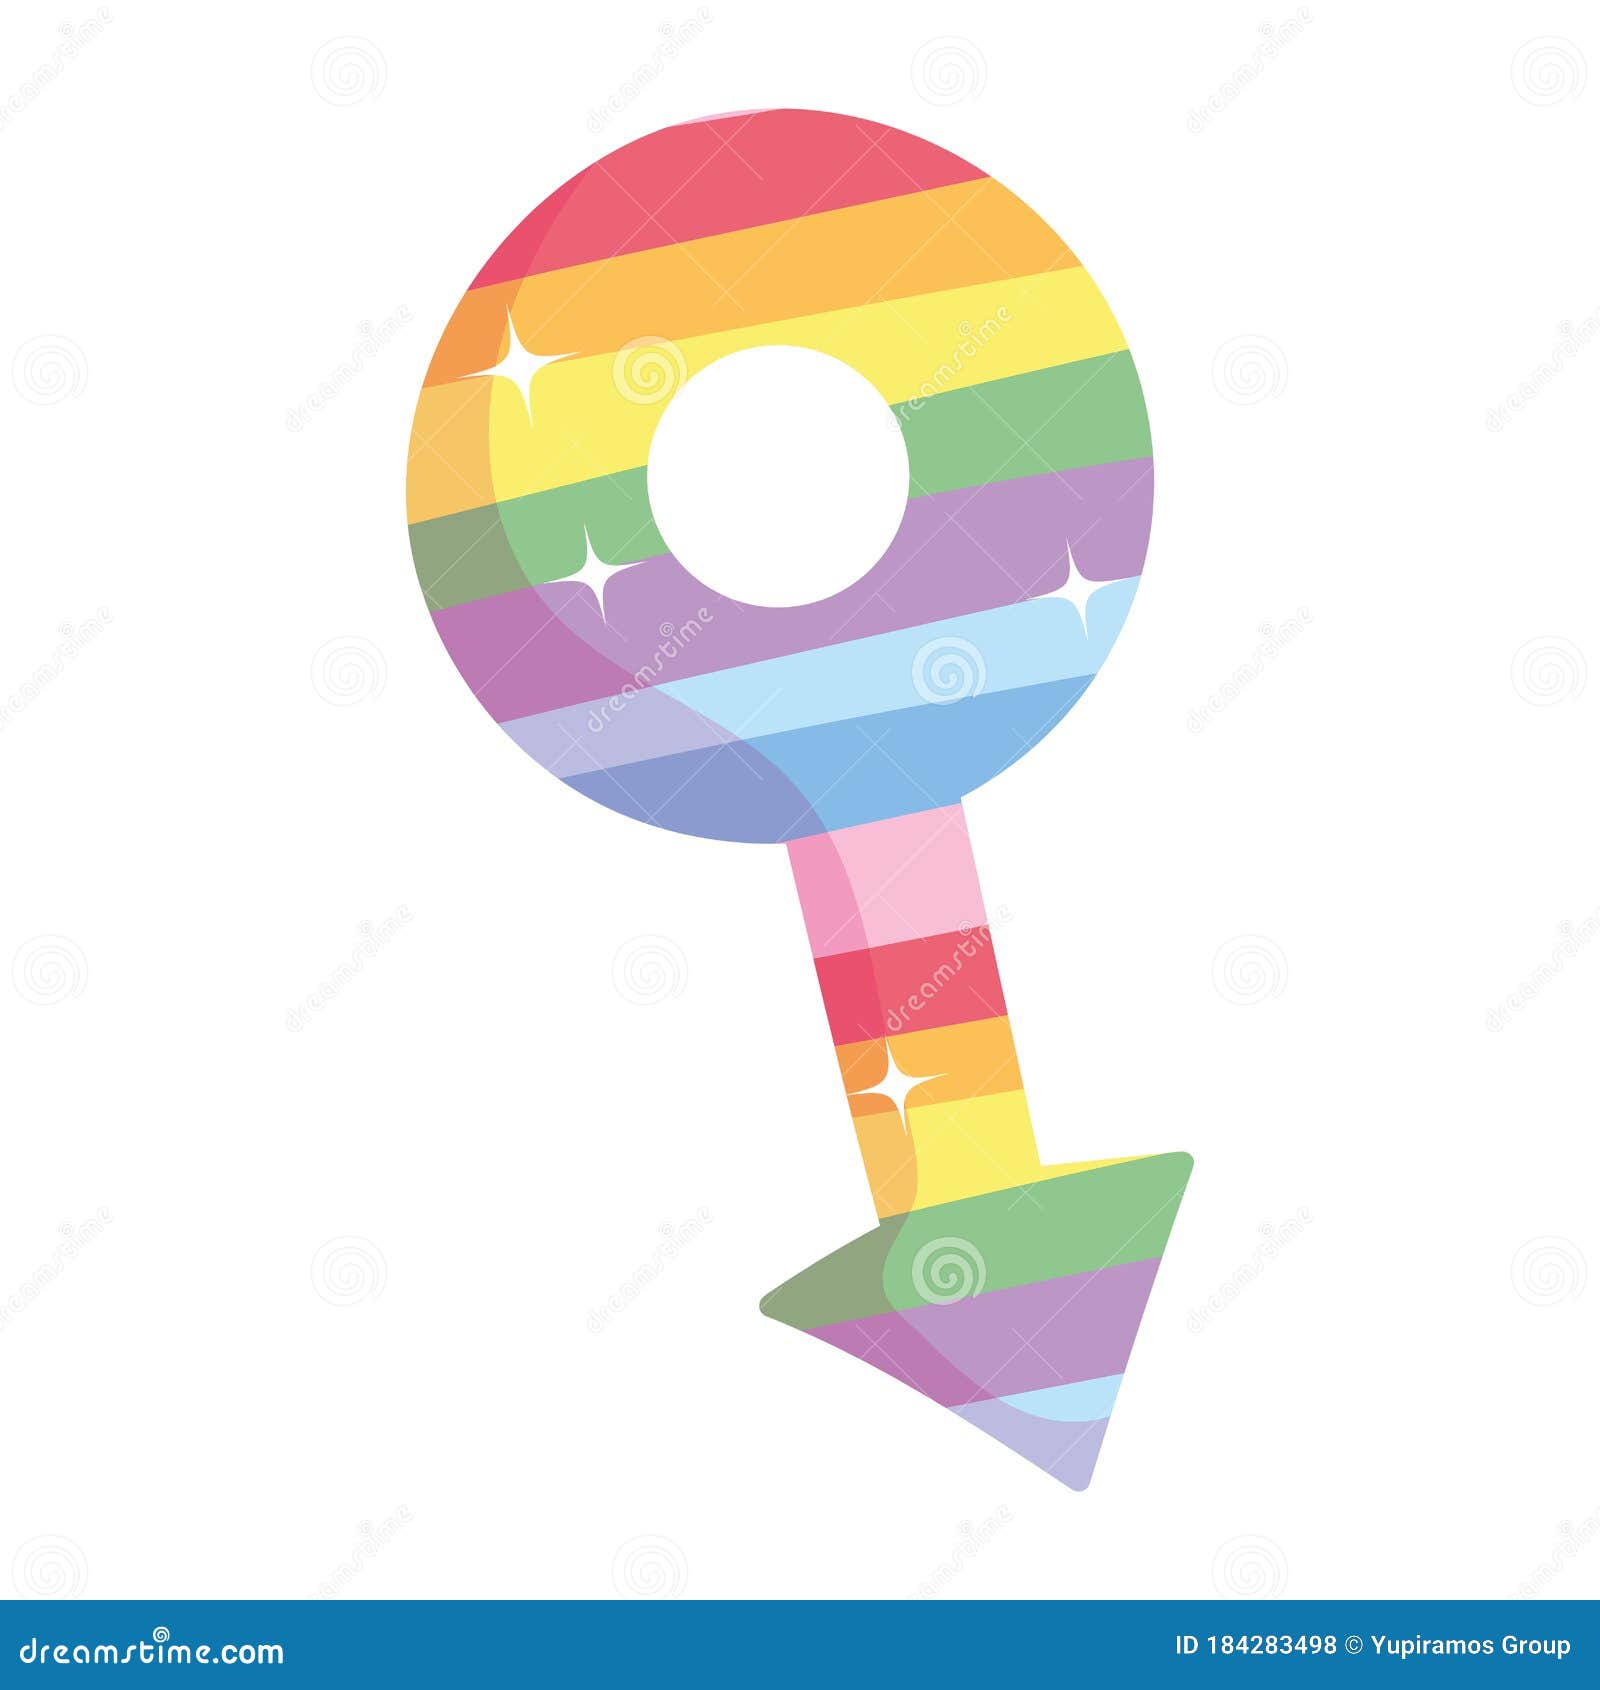 Isolated Lgtbi Male Gender Vector Design Stock Vector Illustration Of Identity Intimate